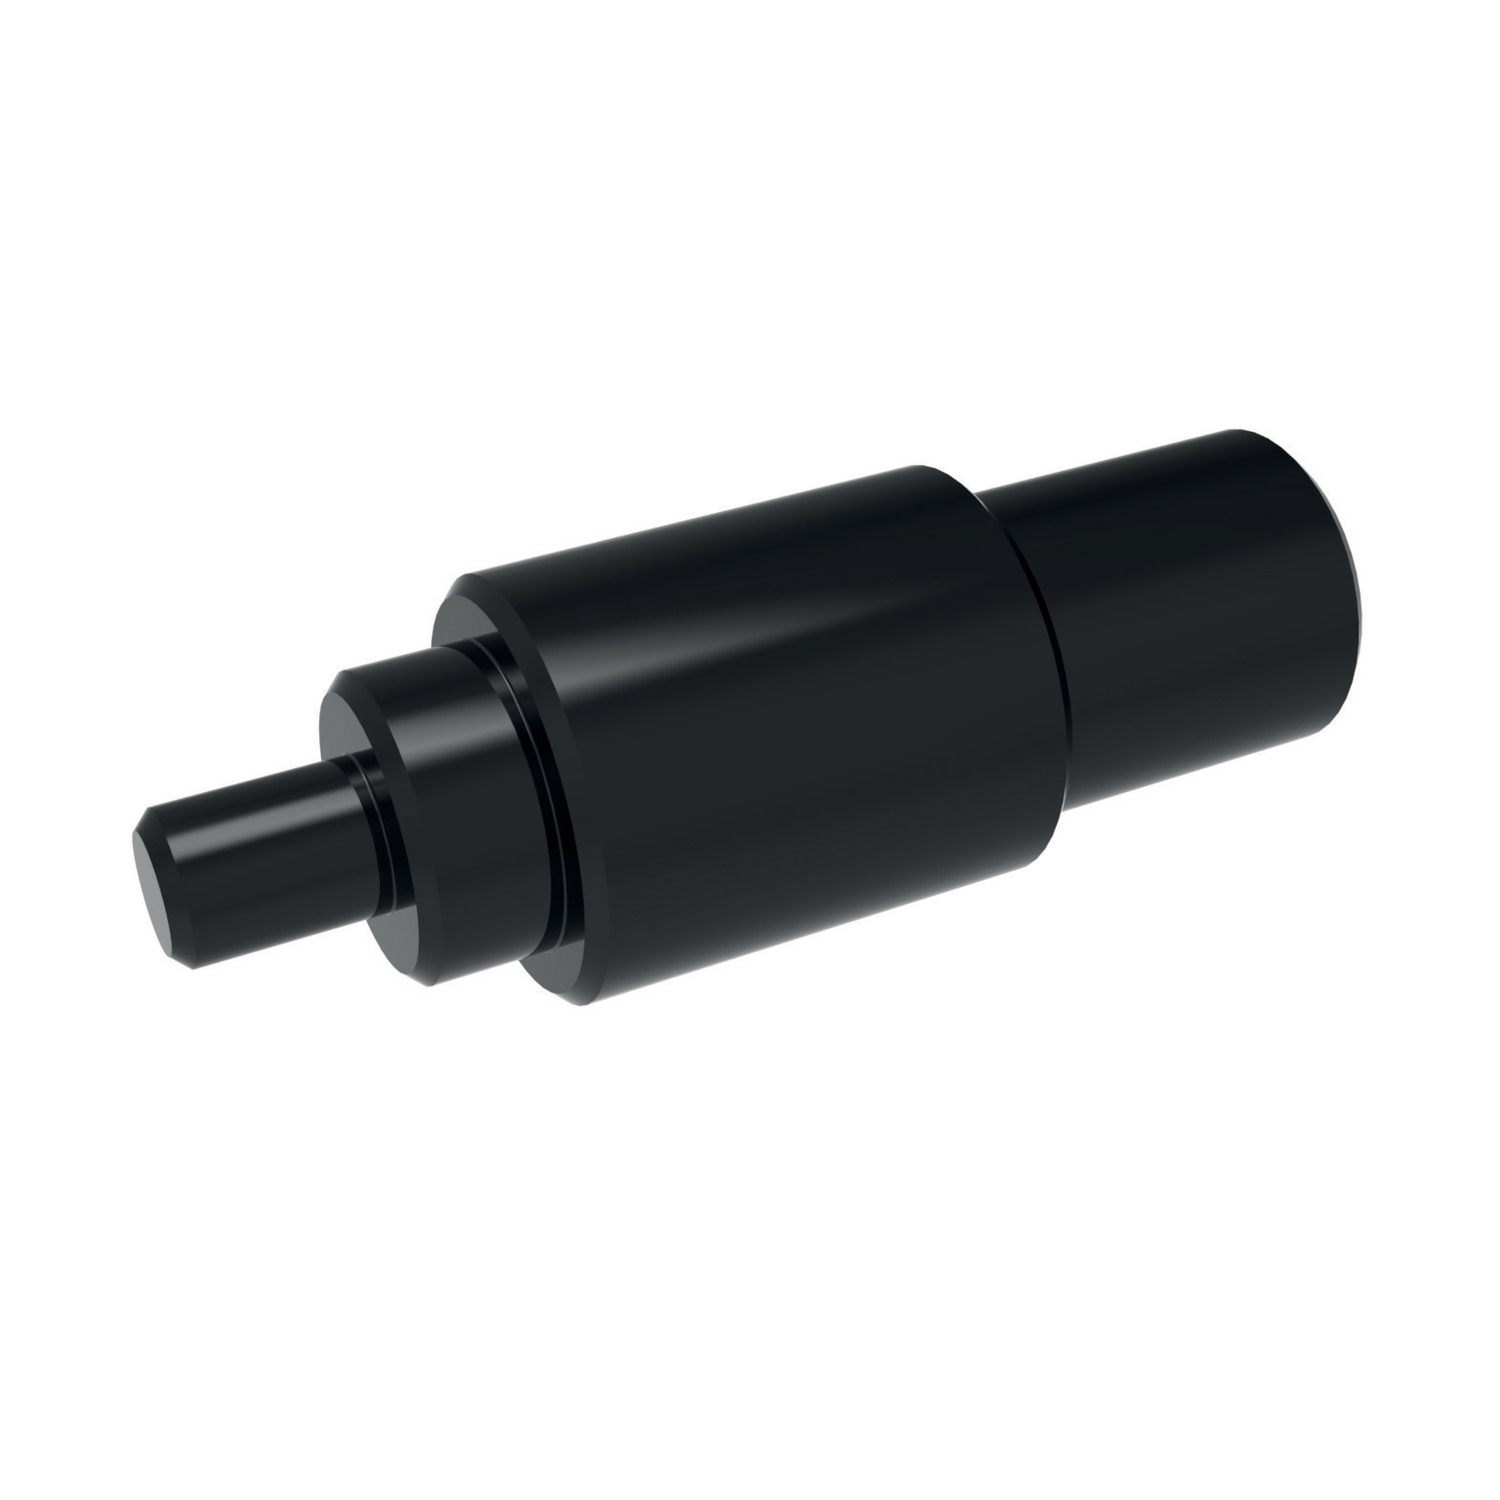 Product 22062, Installation Tool - Metric - Heavy Duty for threaded inserts 22002 & 22006 / 